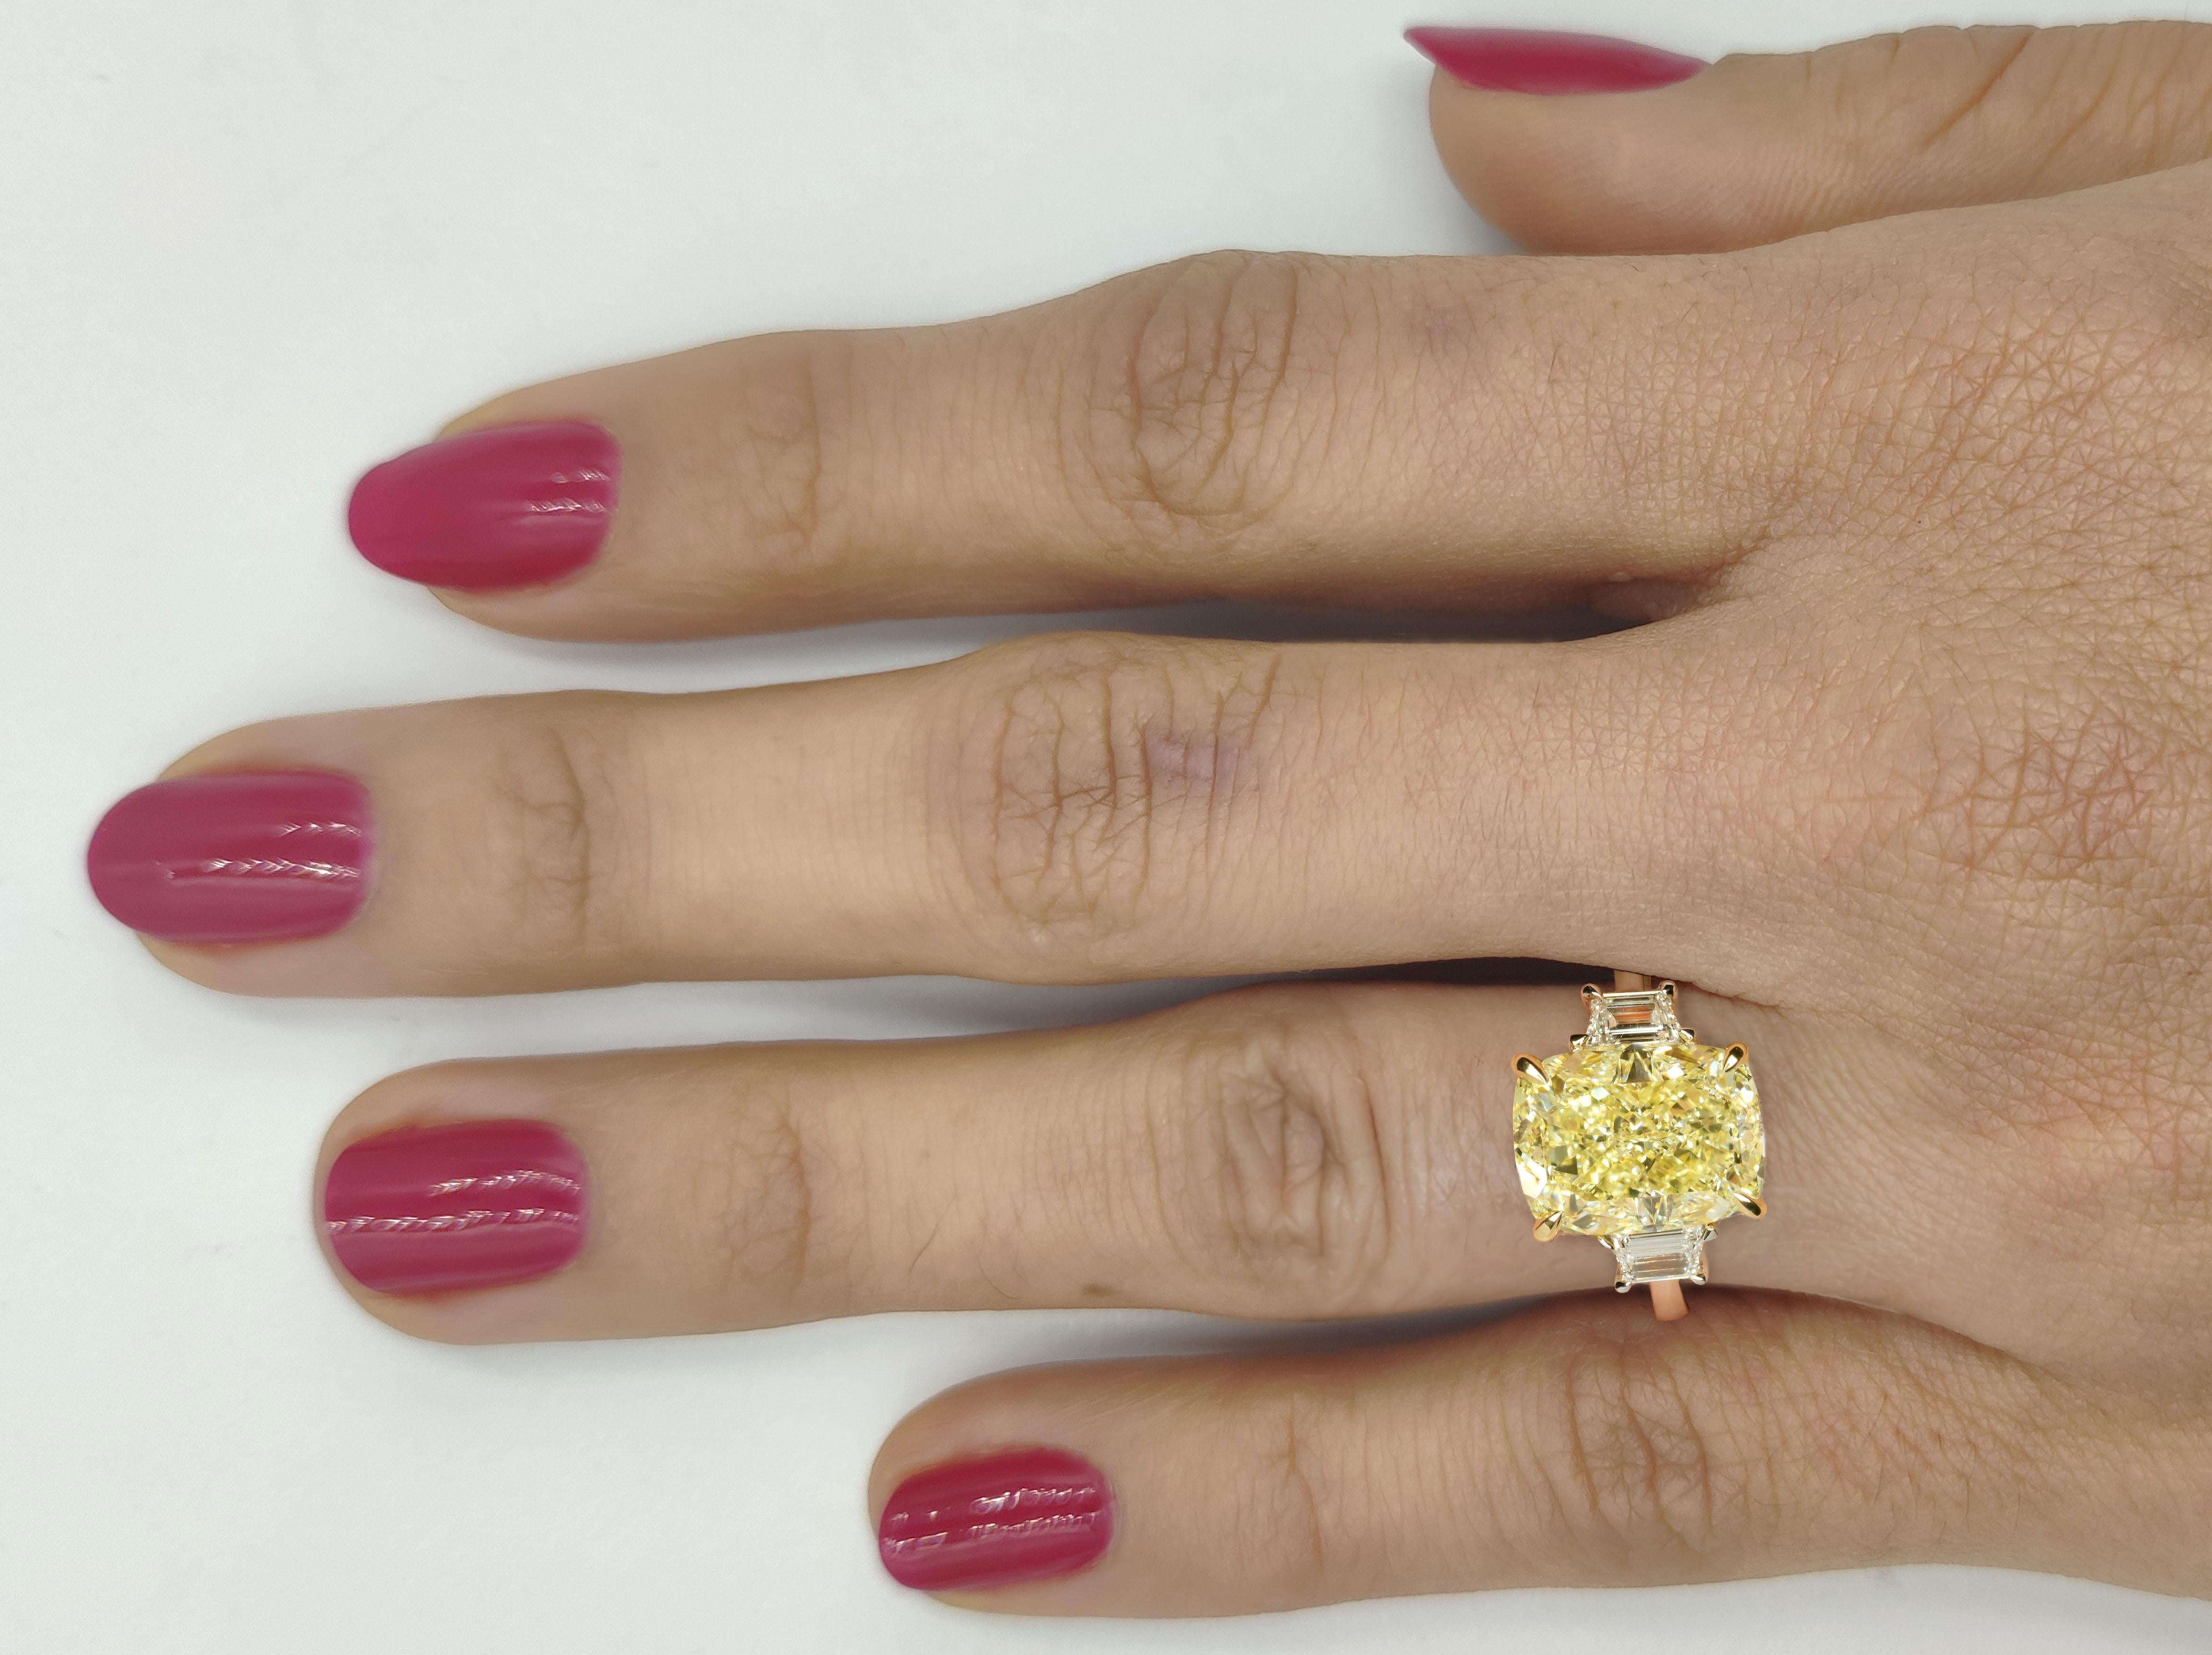 A genuine showstopper! Show your true colors with this extraordinary fancy yellow diamond ring featuring a 5 carat GIA Fancy Yellow Radiant Cut Natural Diamond flanked on either side by phenomenal Trapezoid Cut Diamonds weighing together 1 carats.